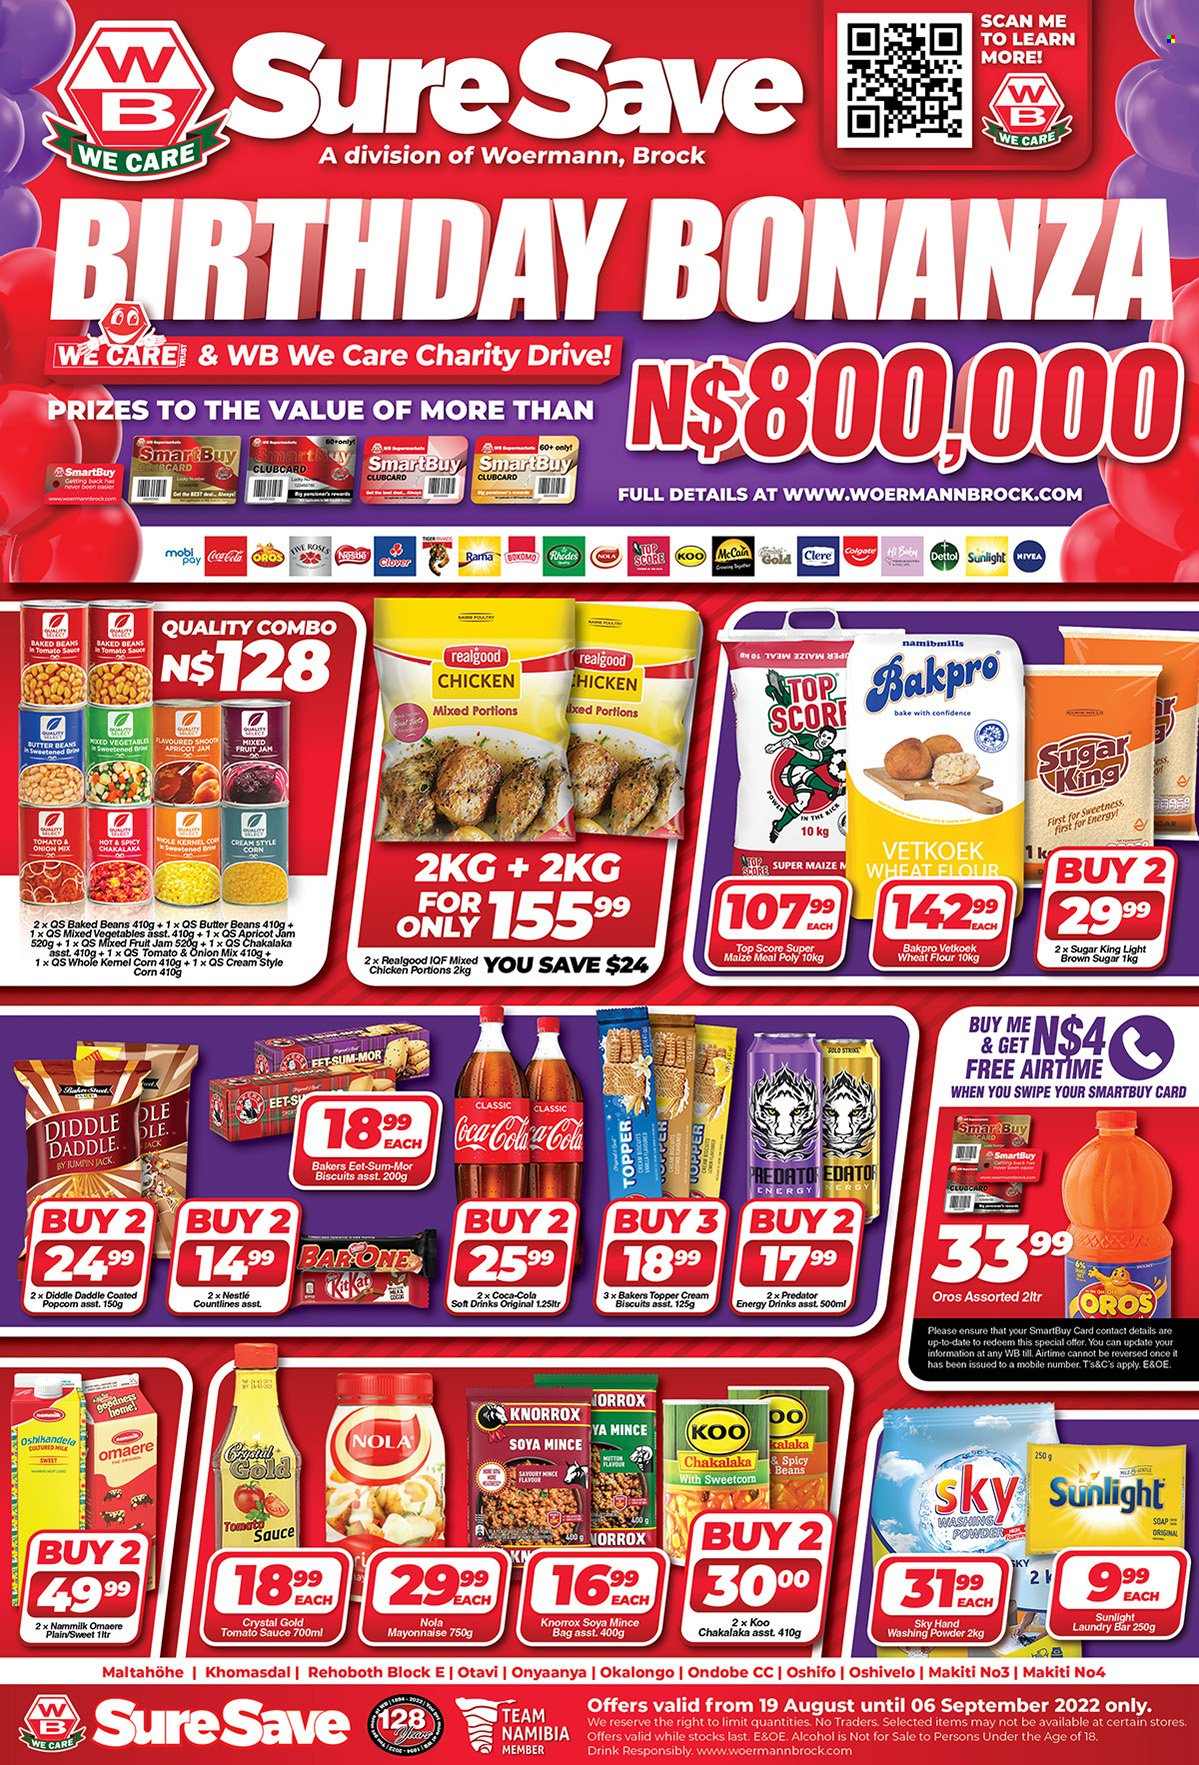 Woermann Brock catalogue  - 19/08/2022 - 06/09/2022 - Sales products - beans, corn, chakalaka, Clover, milk, butter, Rama, mayonnaise, mixed vegetables, McCain, Nestlé, biscuit, cane sugar, flour, wheat flour, maize meal, soya mince, Knorrox, baked beans, Koo, apricot jam, jam, Coca-Cola, energy drink, soft drink, Oros, alcohol, Dettol, laundry powder, laundry soap bar, Sunlight, soap, Colgate, Clere, Sure, Bakers, Hill's. Page 1.